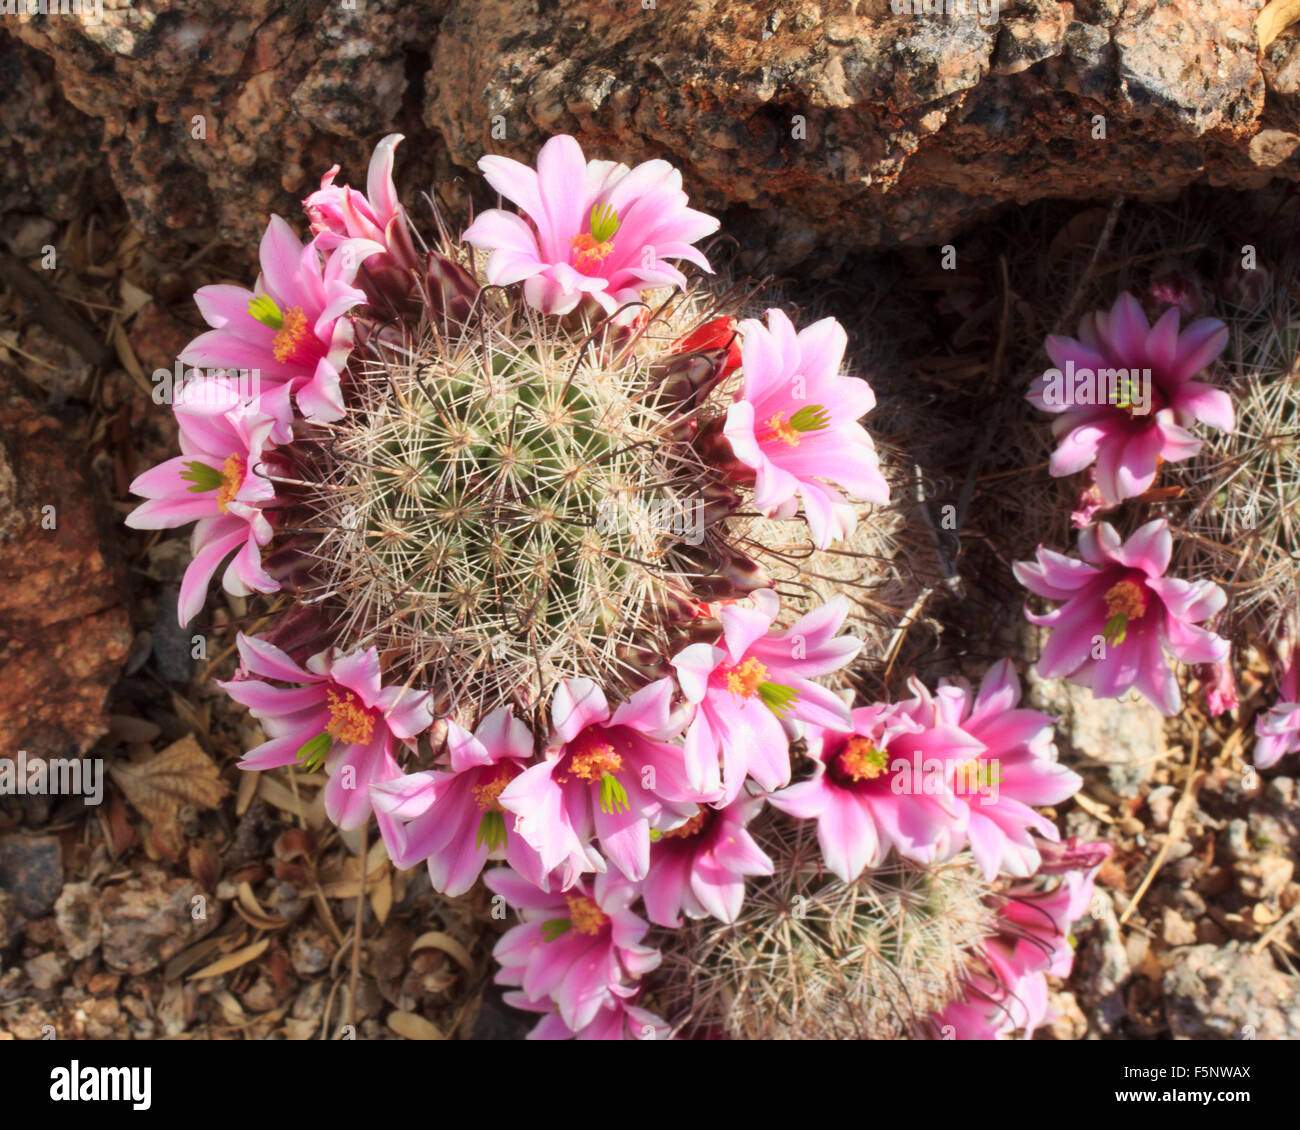 Ring of delicate pink flowers on fishhook pincushion cactus. Stock Photo